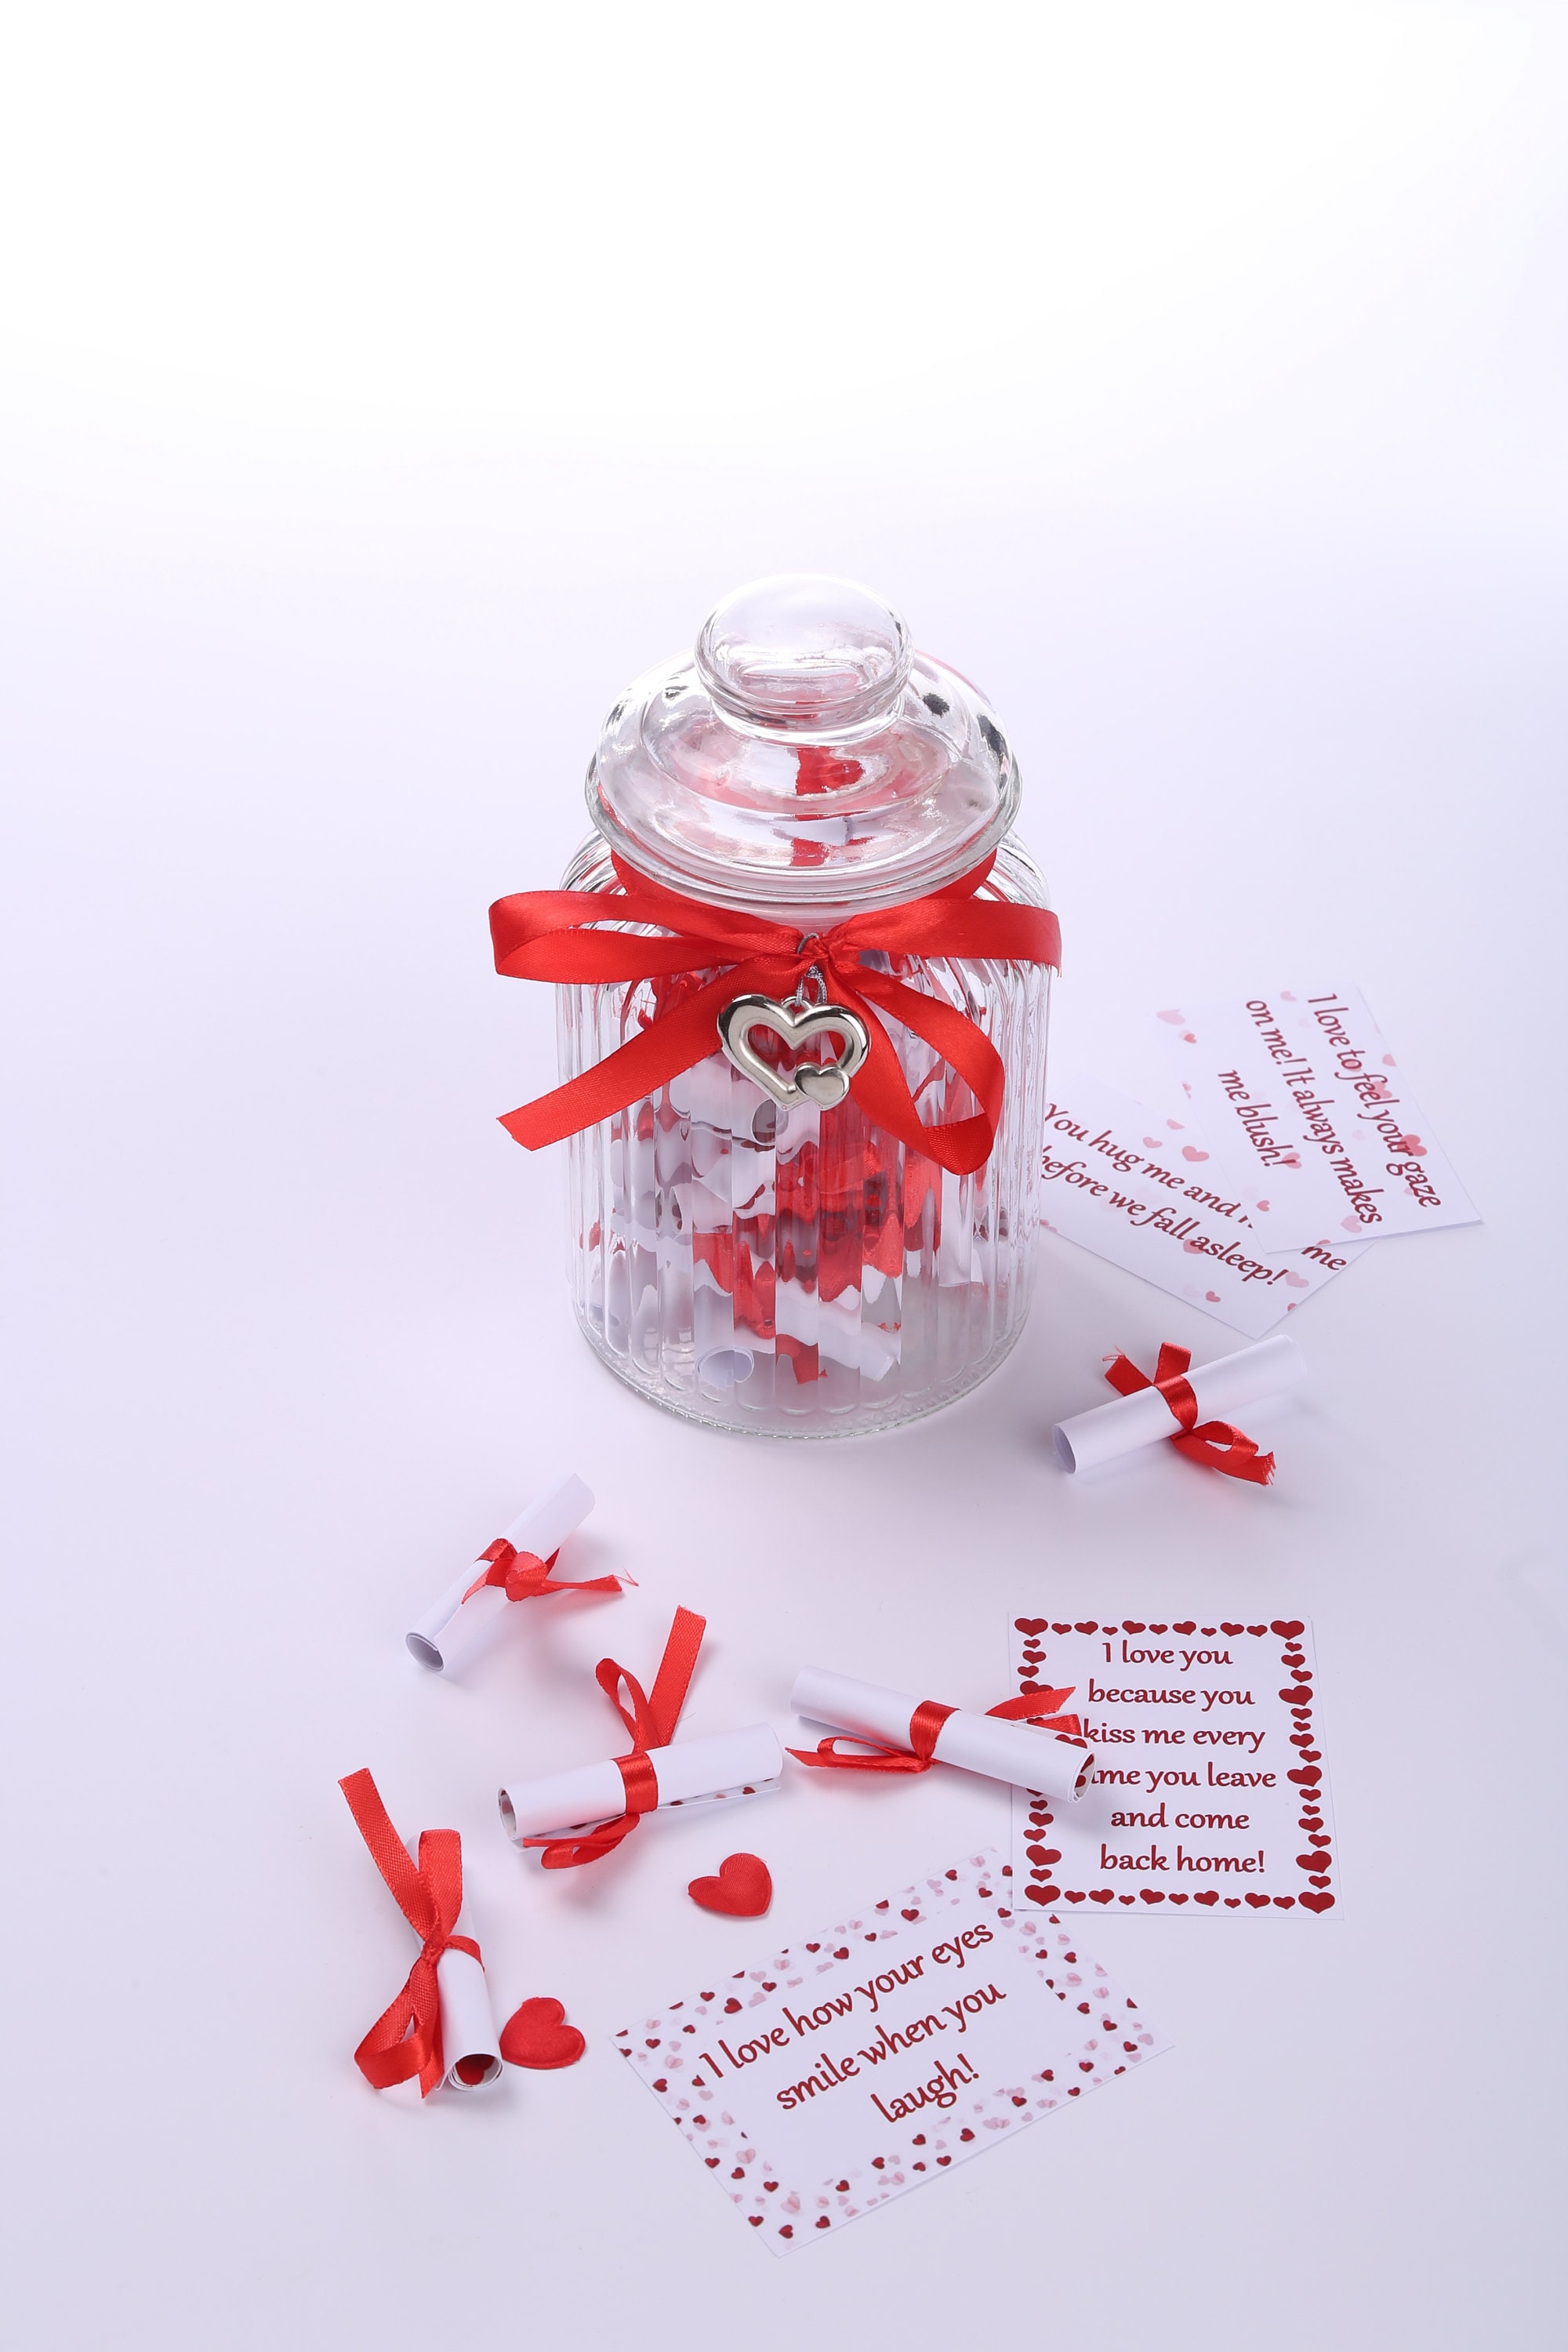 365 Reasons Why I Love You Personalized Jar Romantic Gifts for Him DIY Love  Notes Sentimental Gifts for Boyfriend 